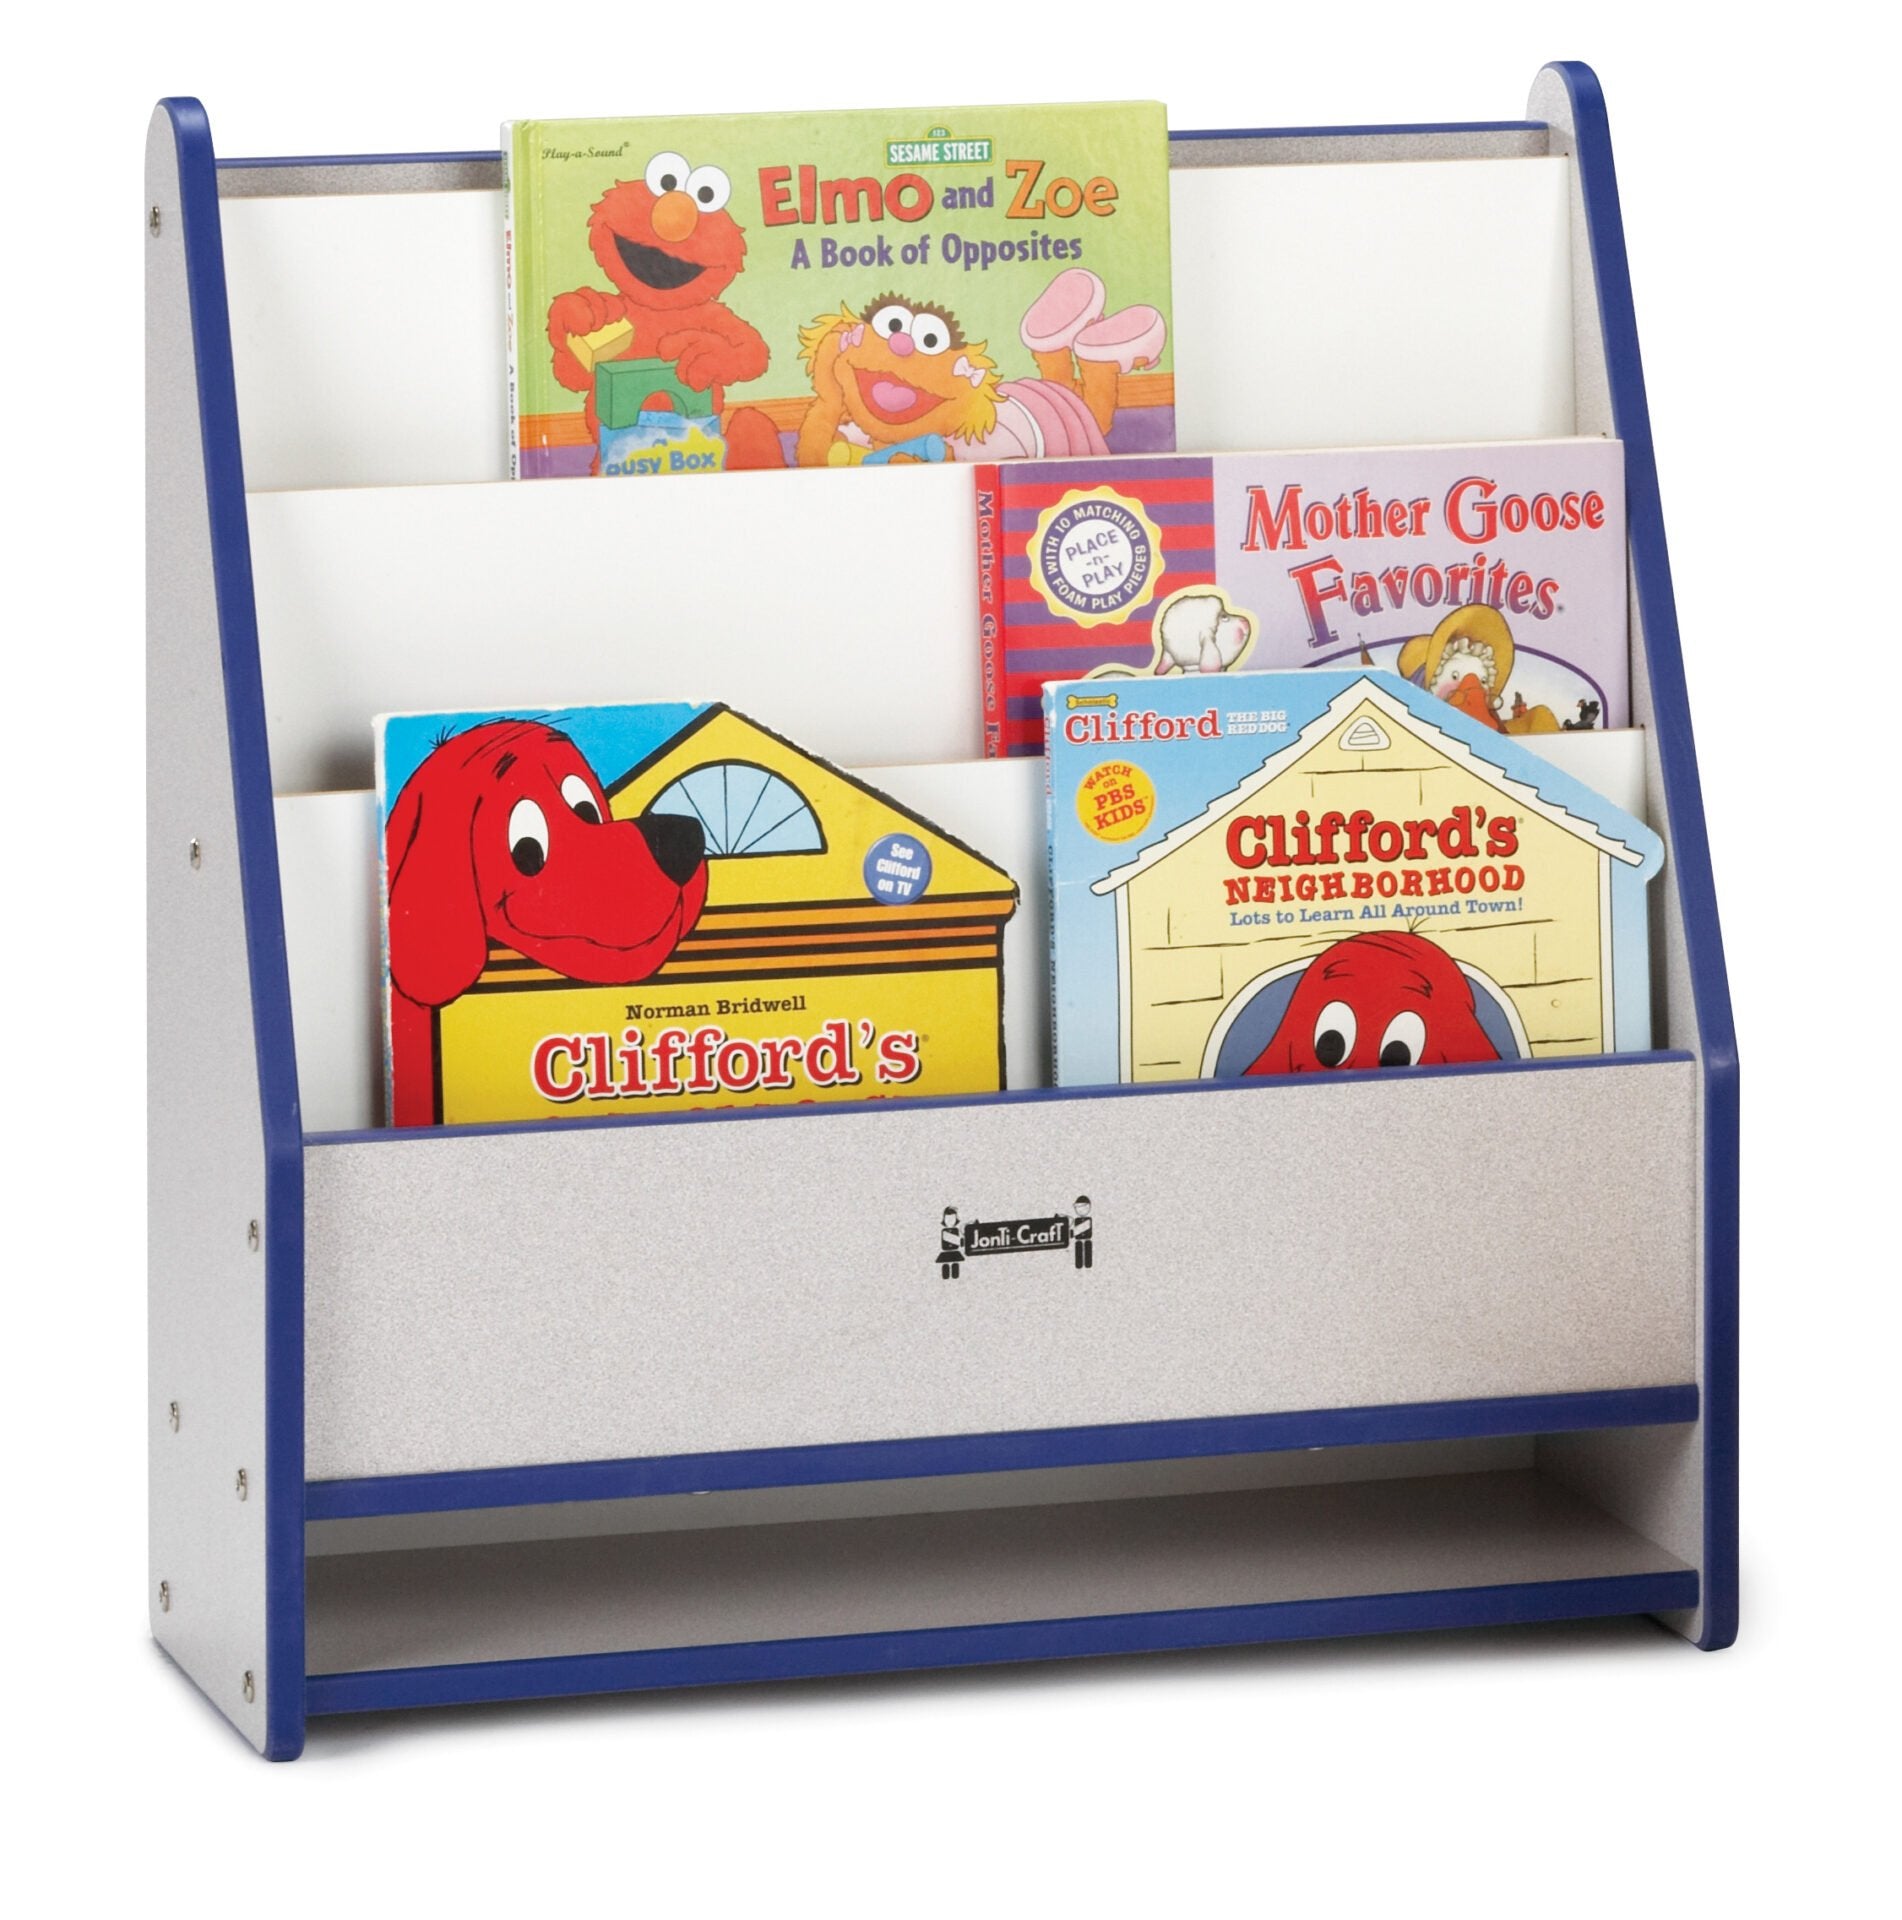 Rainbow AccentsÂ® Toddler Pick-a-Book Stand - Blue